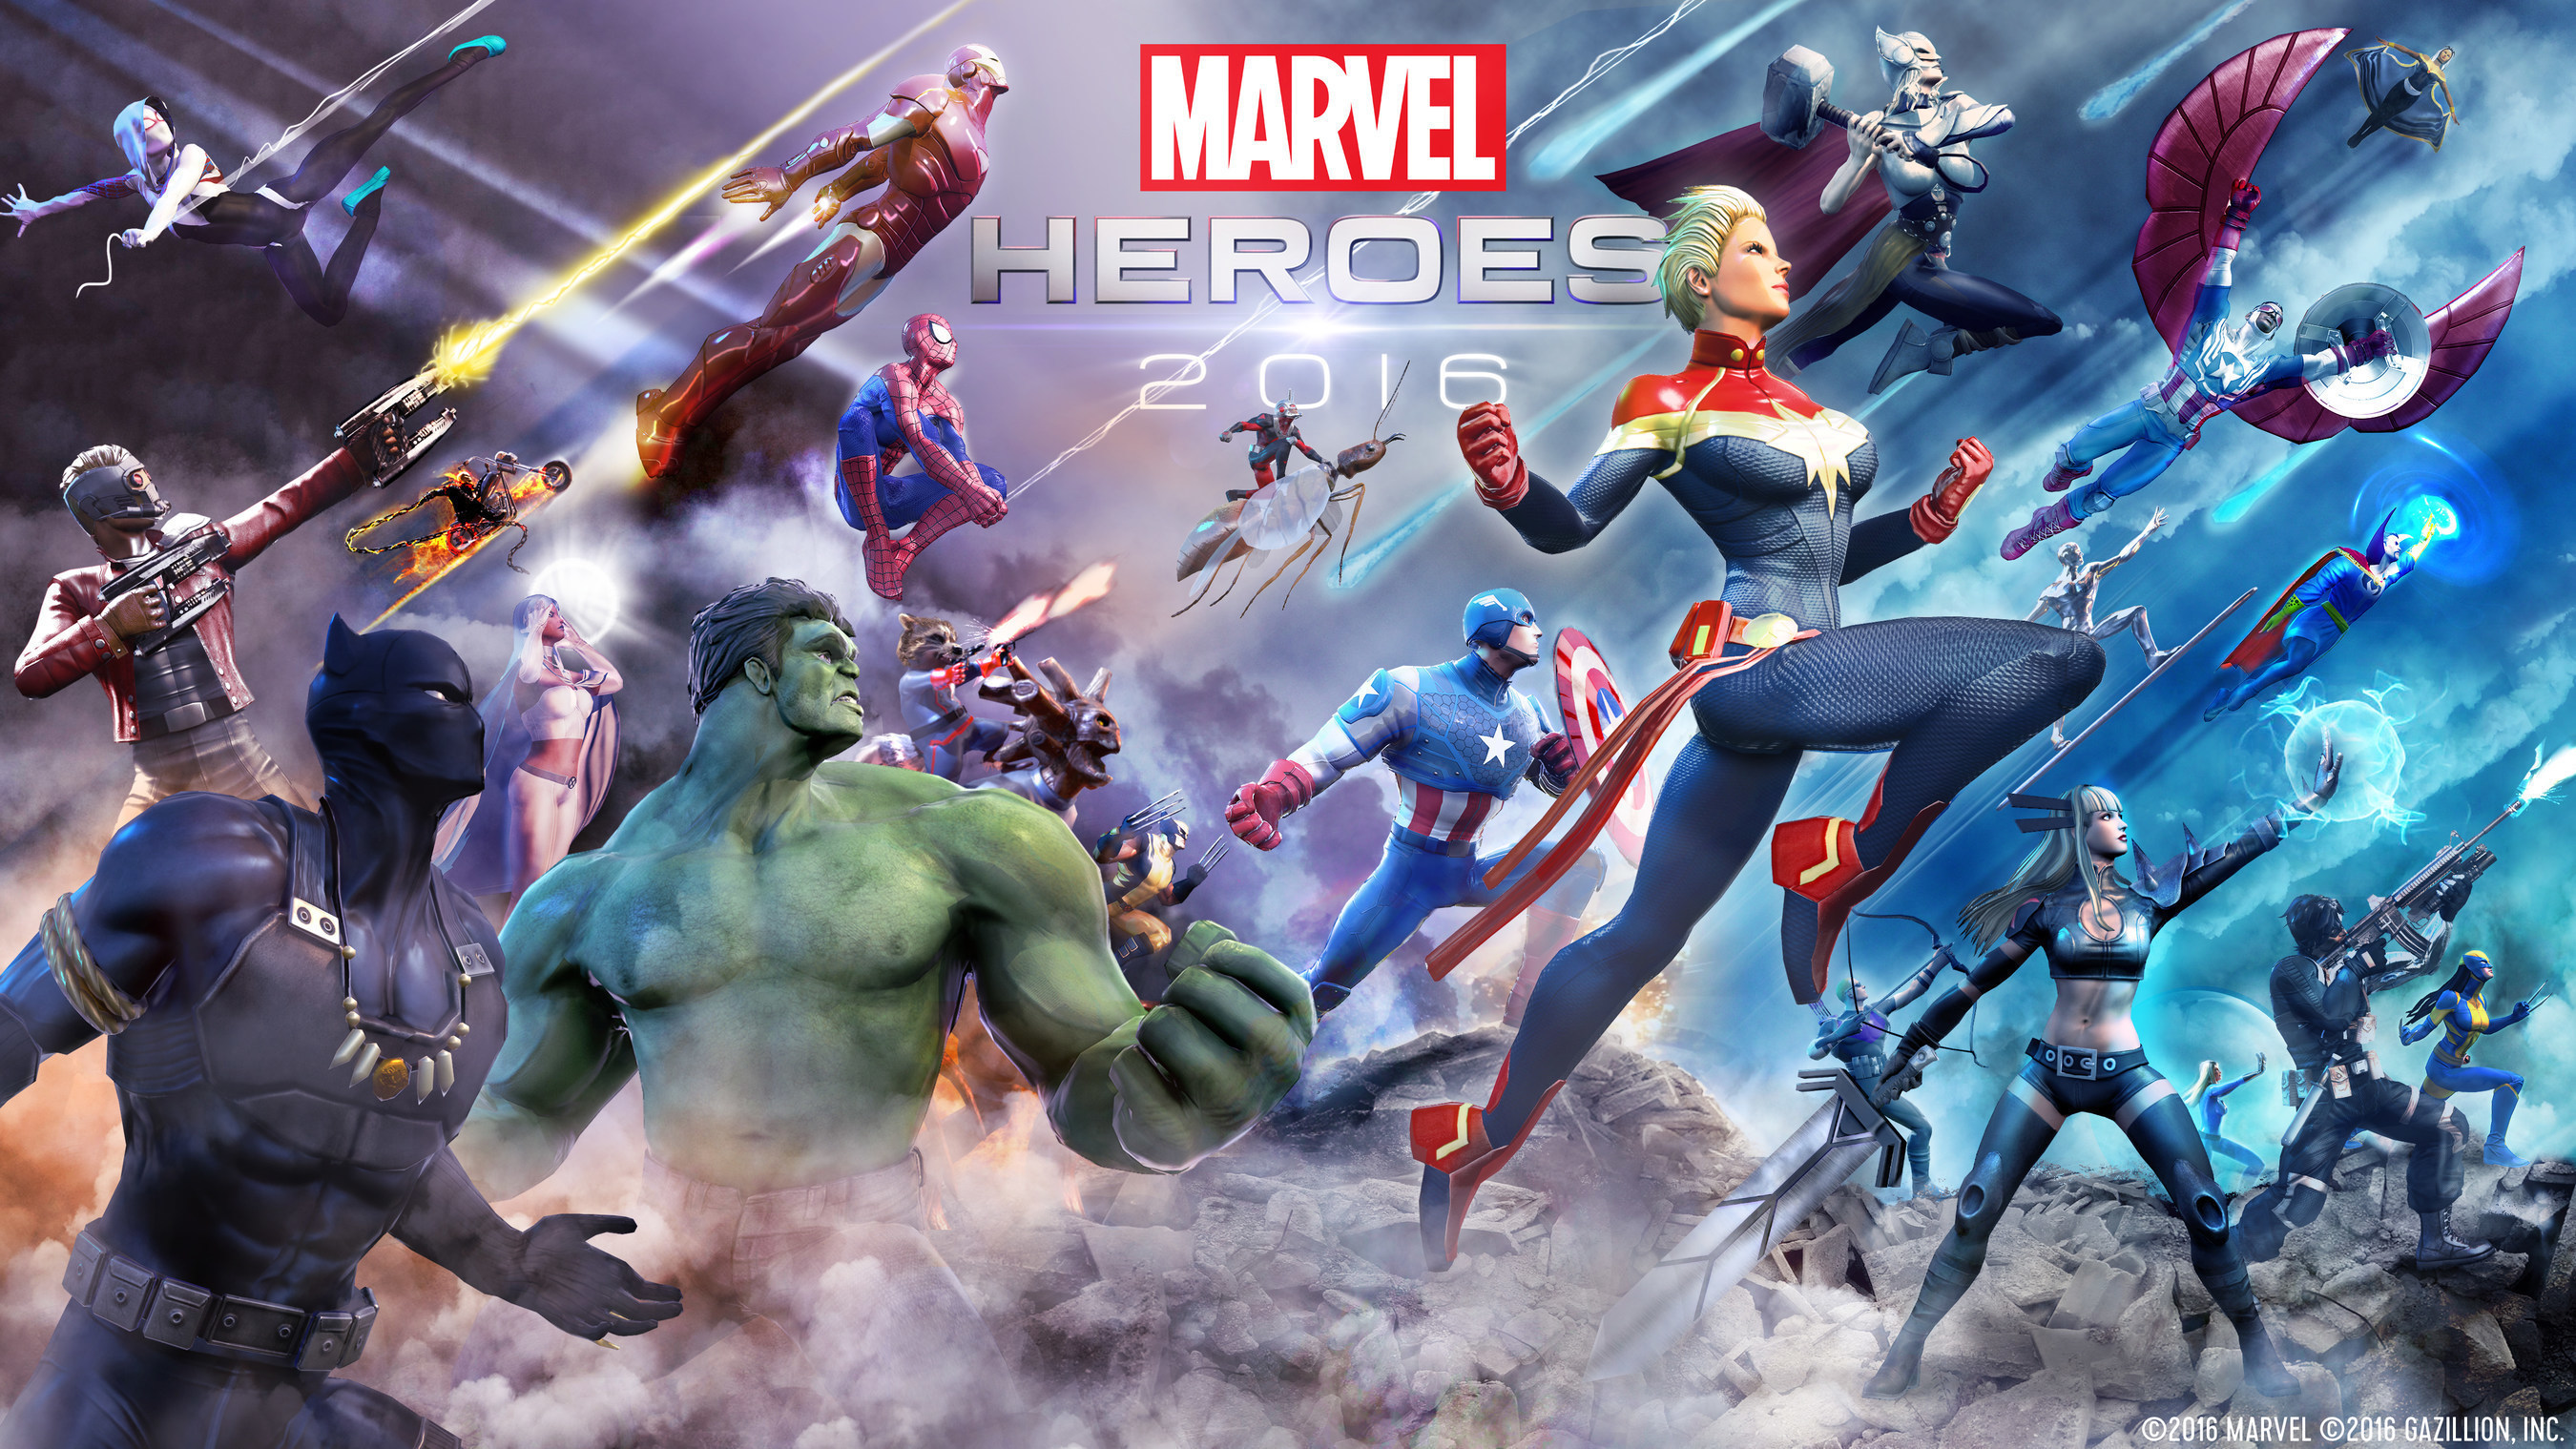 Gazillion and Ubitus will bring the critically acclaimed action-RPG "Marvel Heroes 2016" to Asian territories beginning this summer, starting with Korea and moving from there to Japan and China.